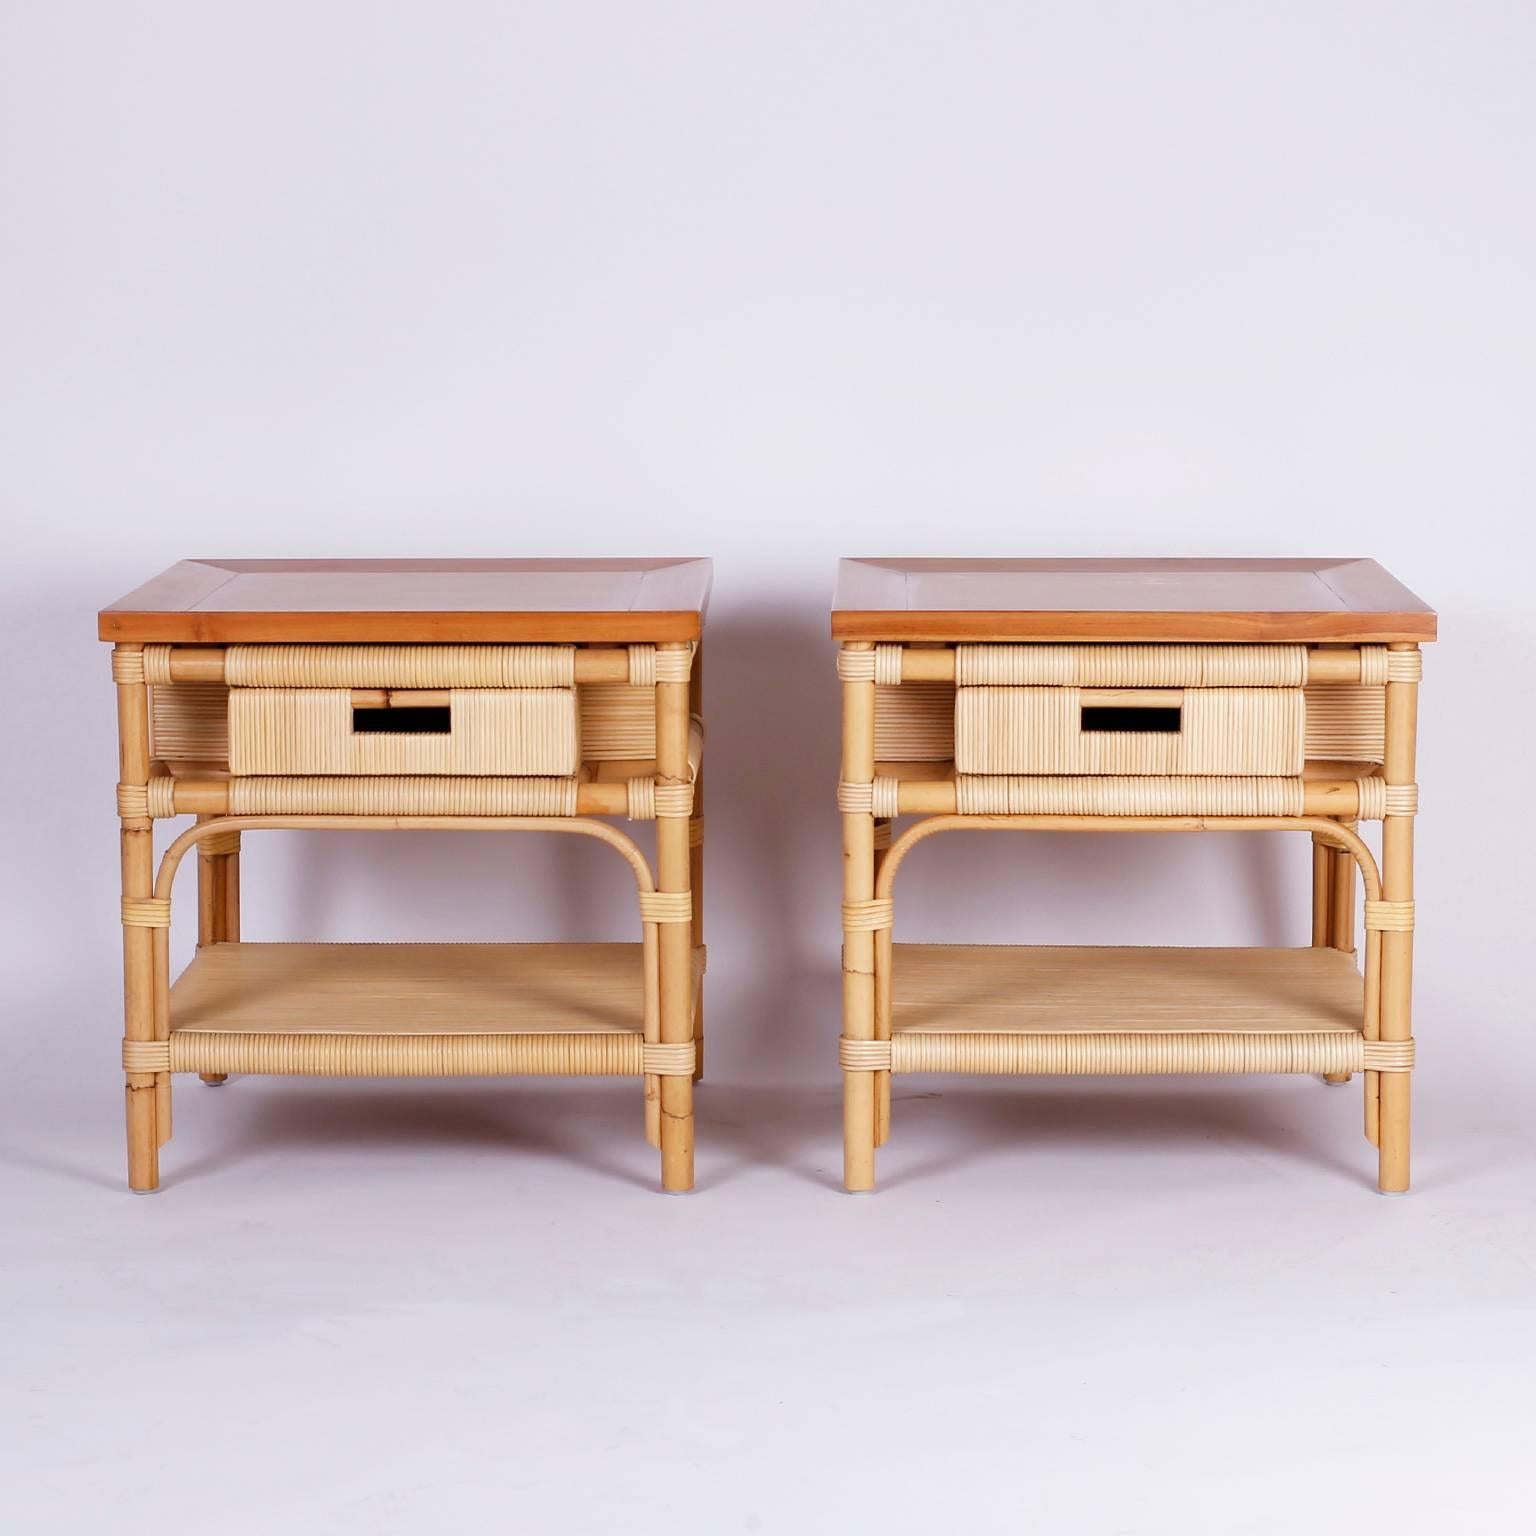 Dashing pair of one drawer end tables or nightstands with a handy lower plateau, cross banded poplar tops, and a bamboo frame wrapped with reed. Highest quality and unsurpassed casual elegance. John Hutton for Donghia, Merbau collection. Signed